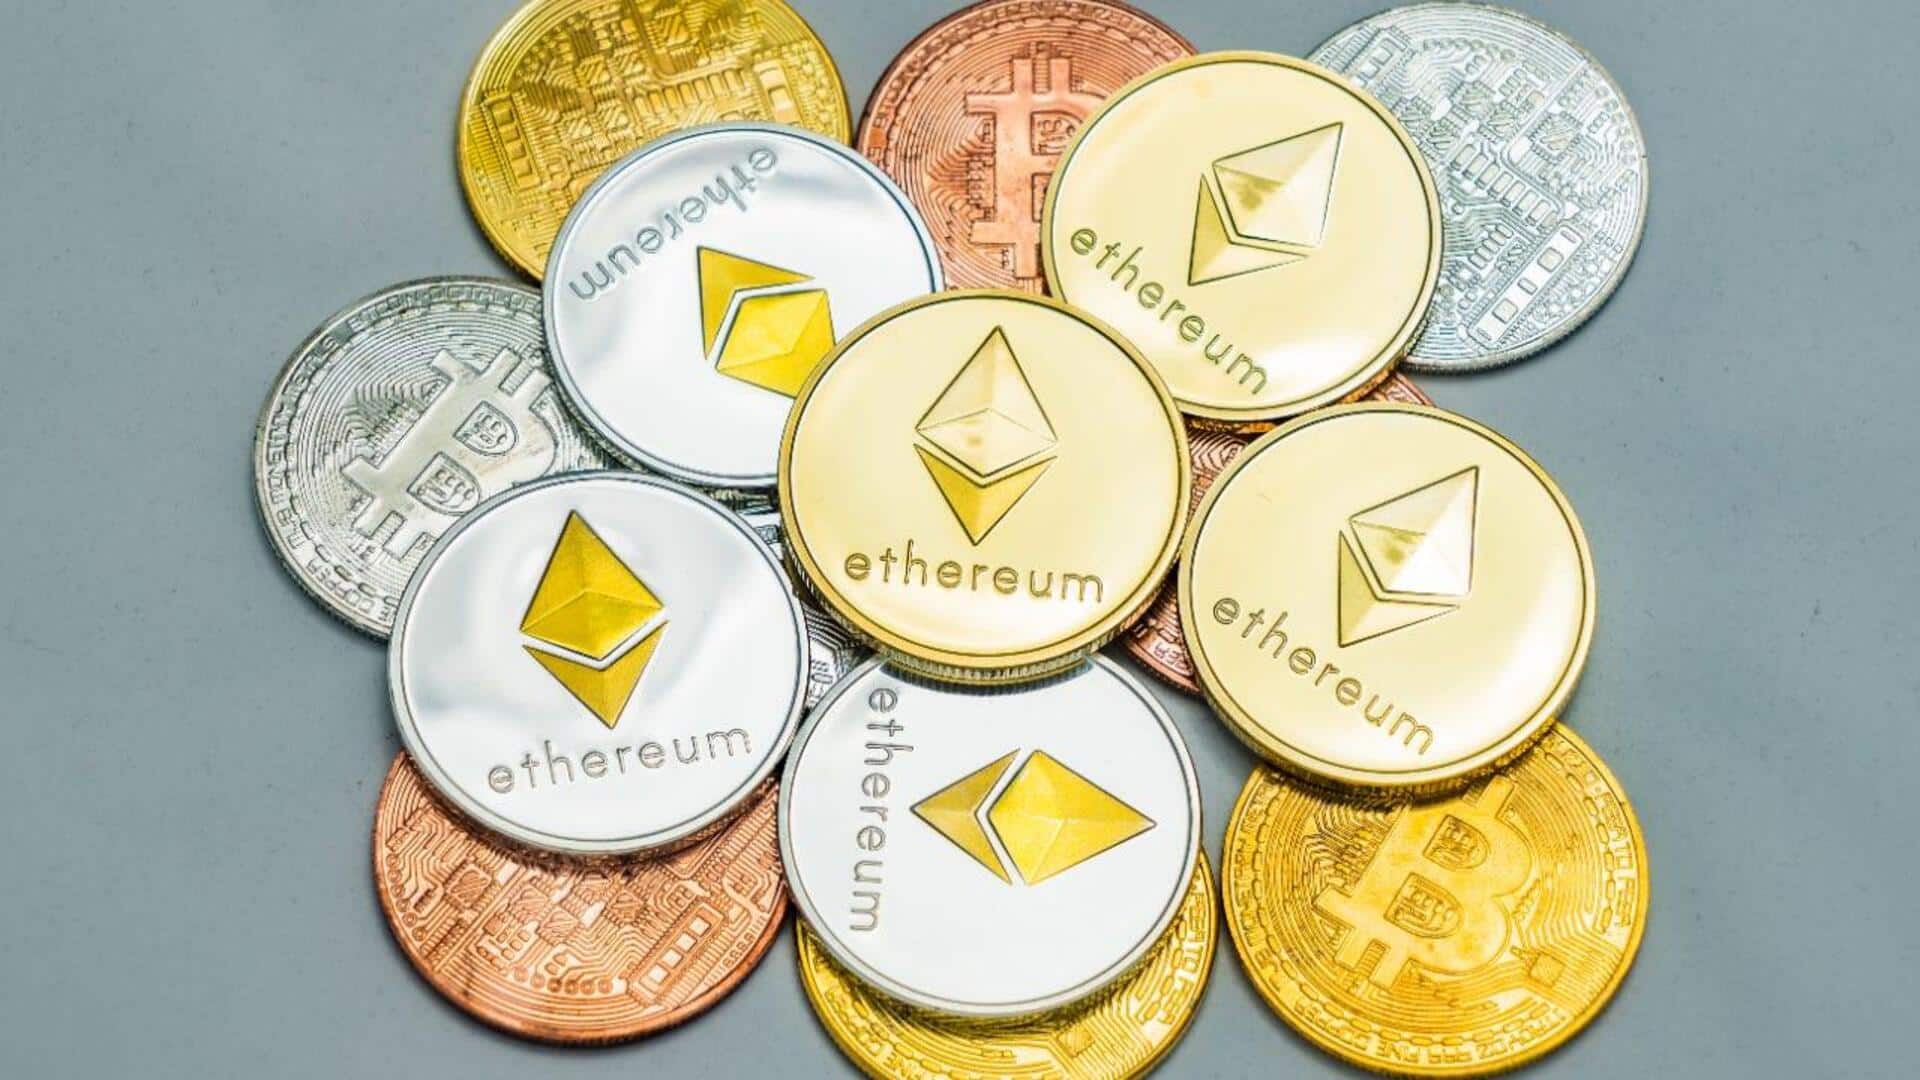 Cryptocurrency prices: Check today's rates of Bitcoin, Dogecoin, Tether, Ethereum 